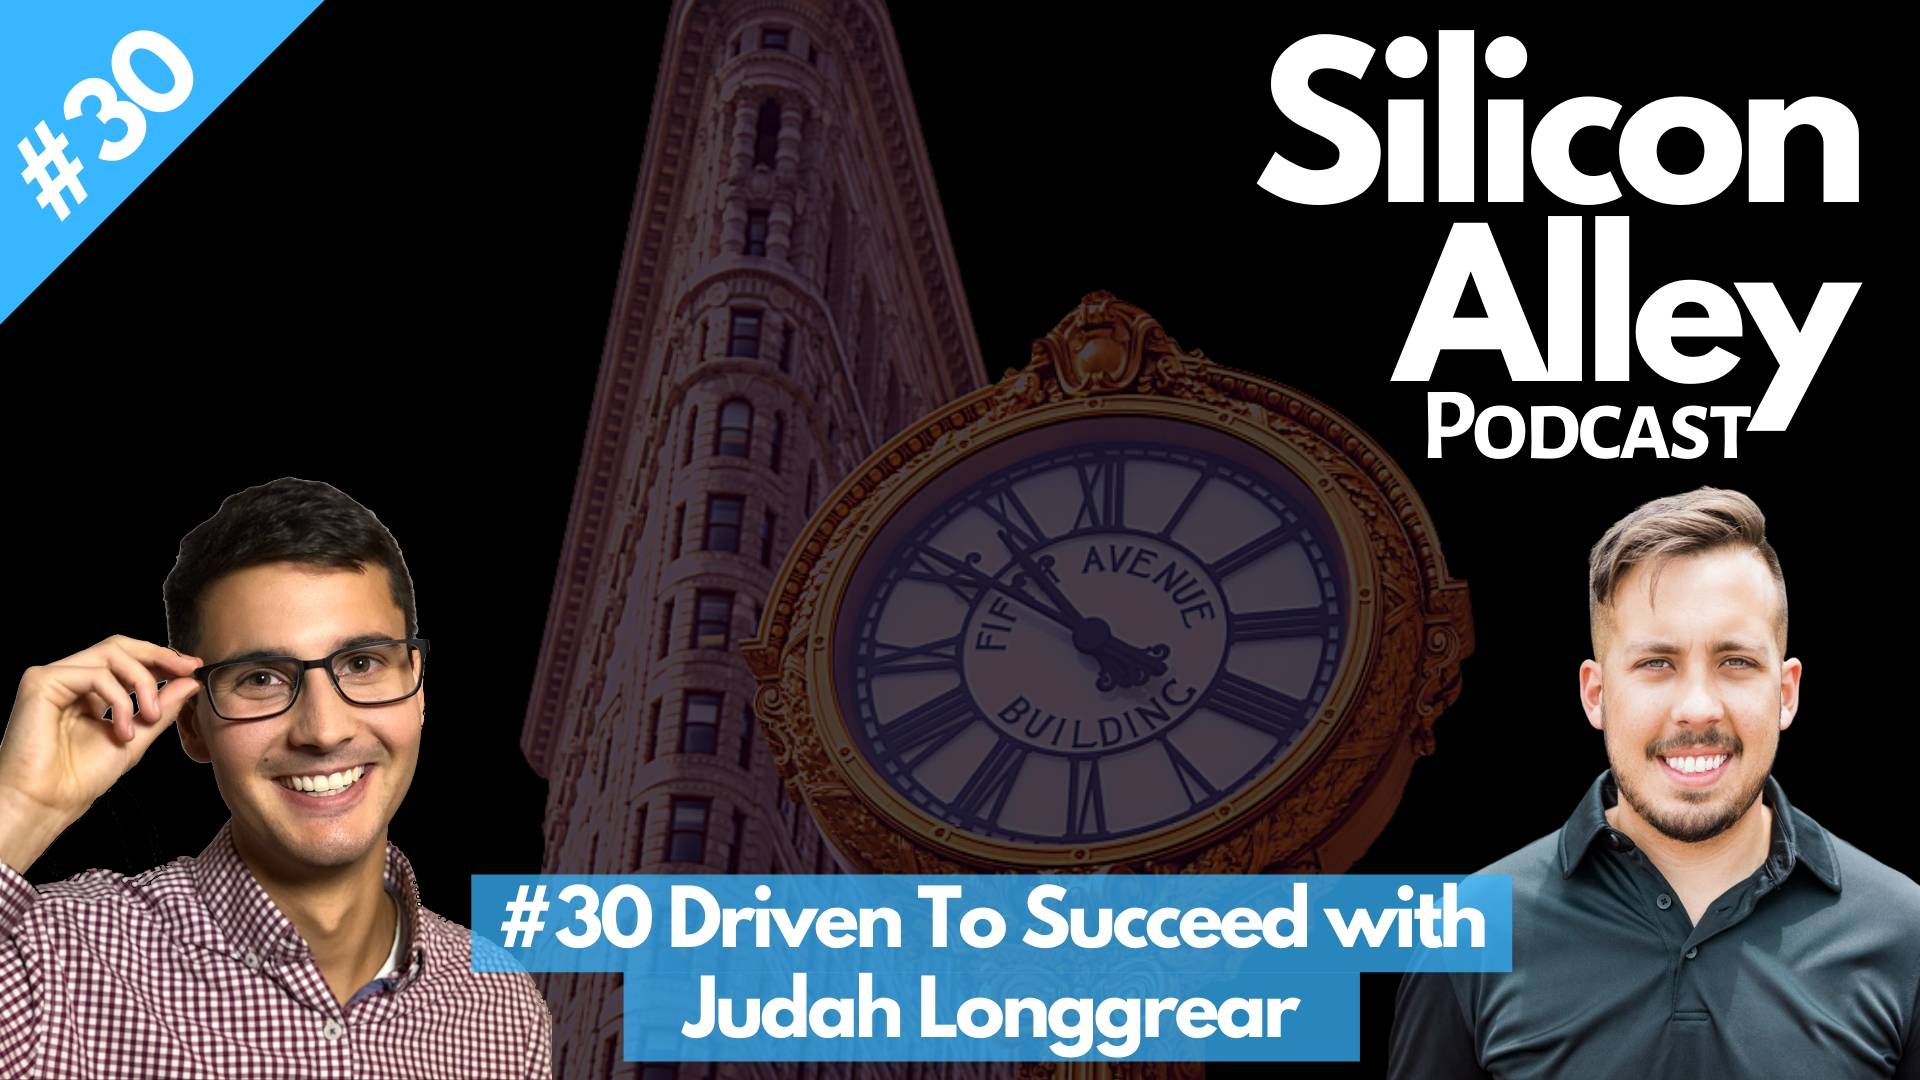 Judah Longgrear CEO & Founder of Nickelytics - Driven to Succeed - Silicon Alley Podcast Cover with Host William Glass